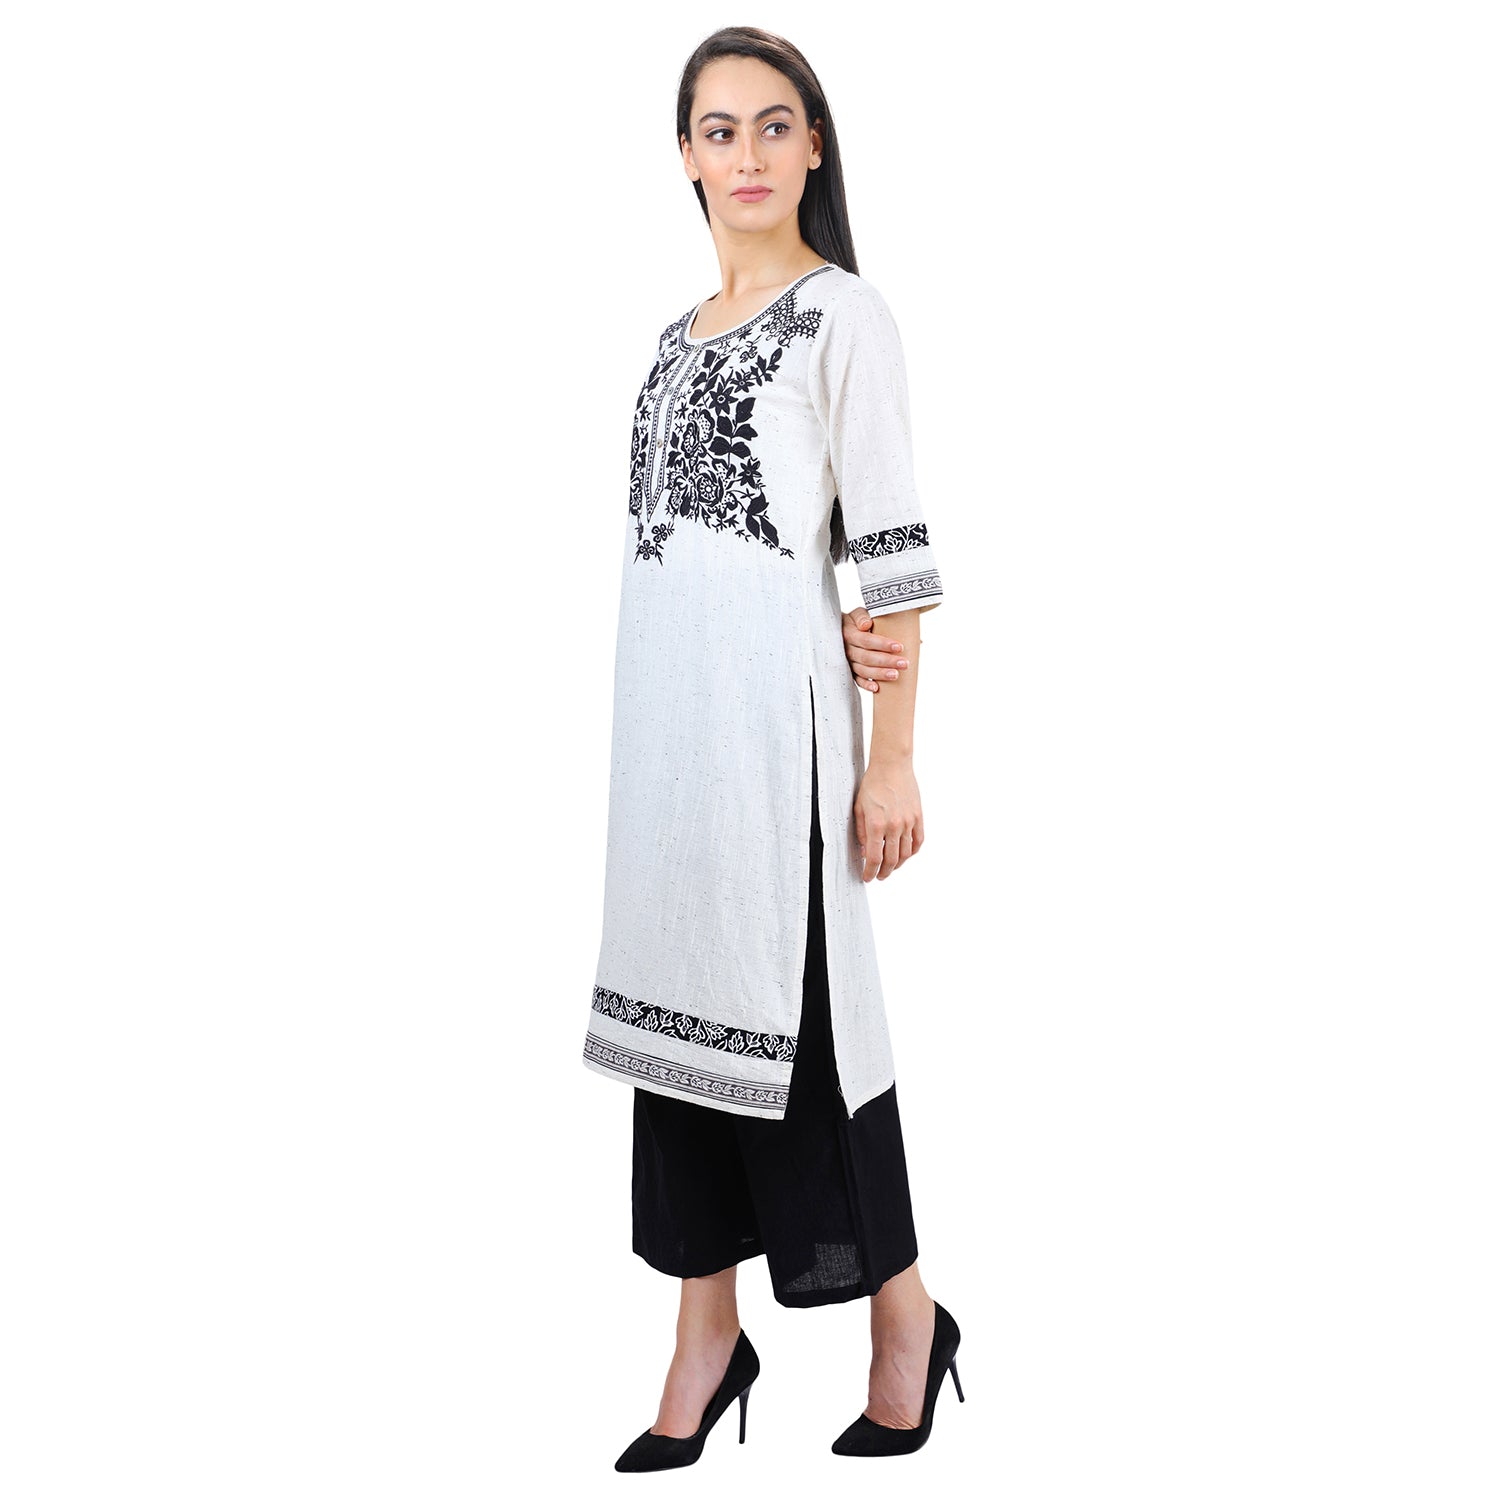 Black and white combination kurti ideas for girls - YouTube